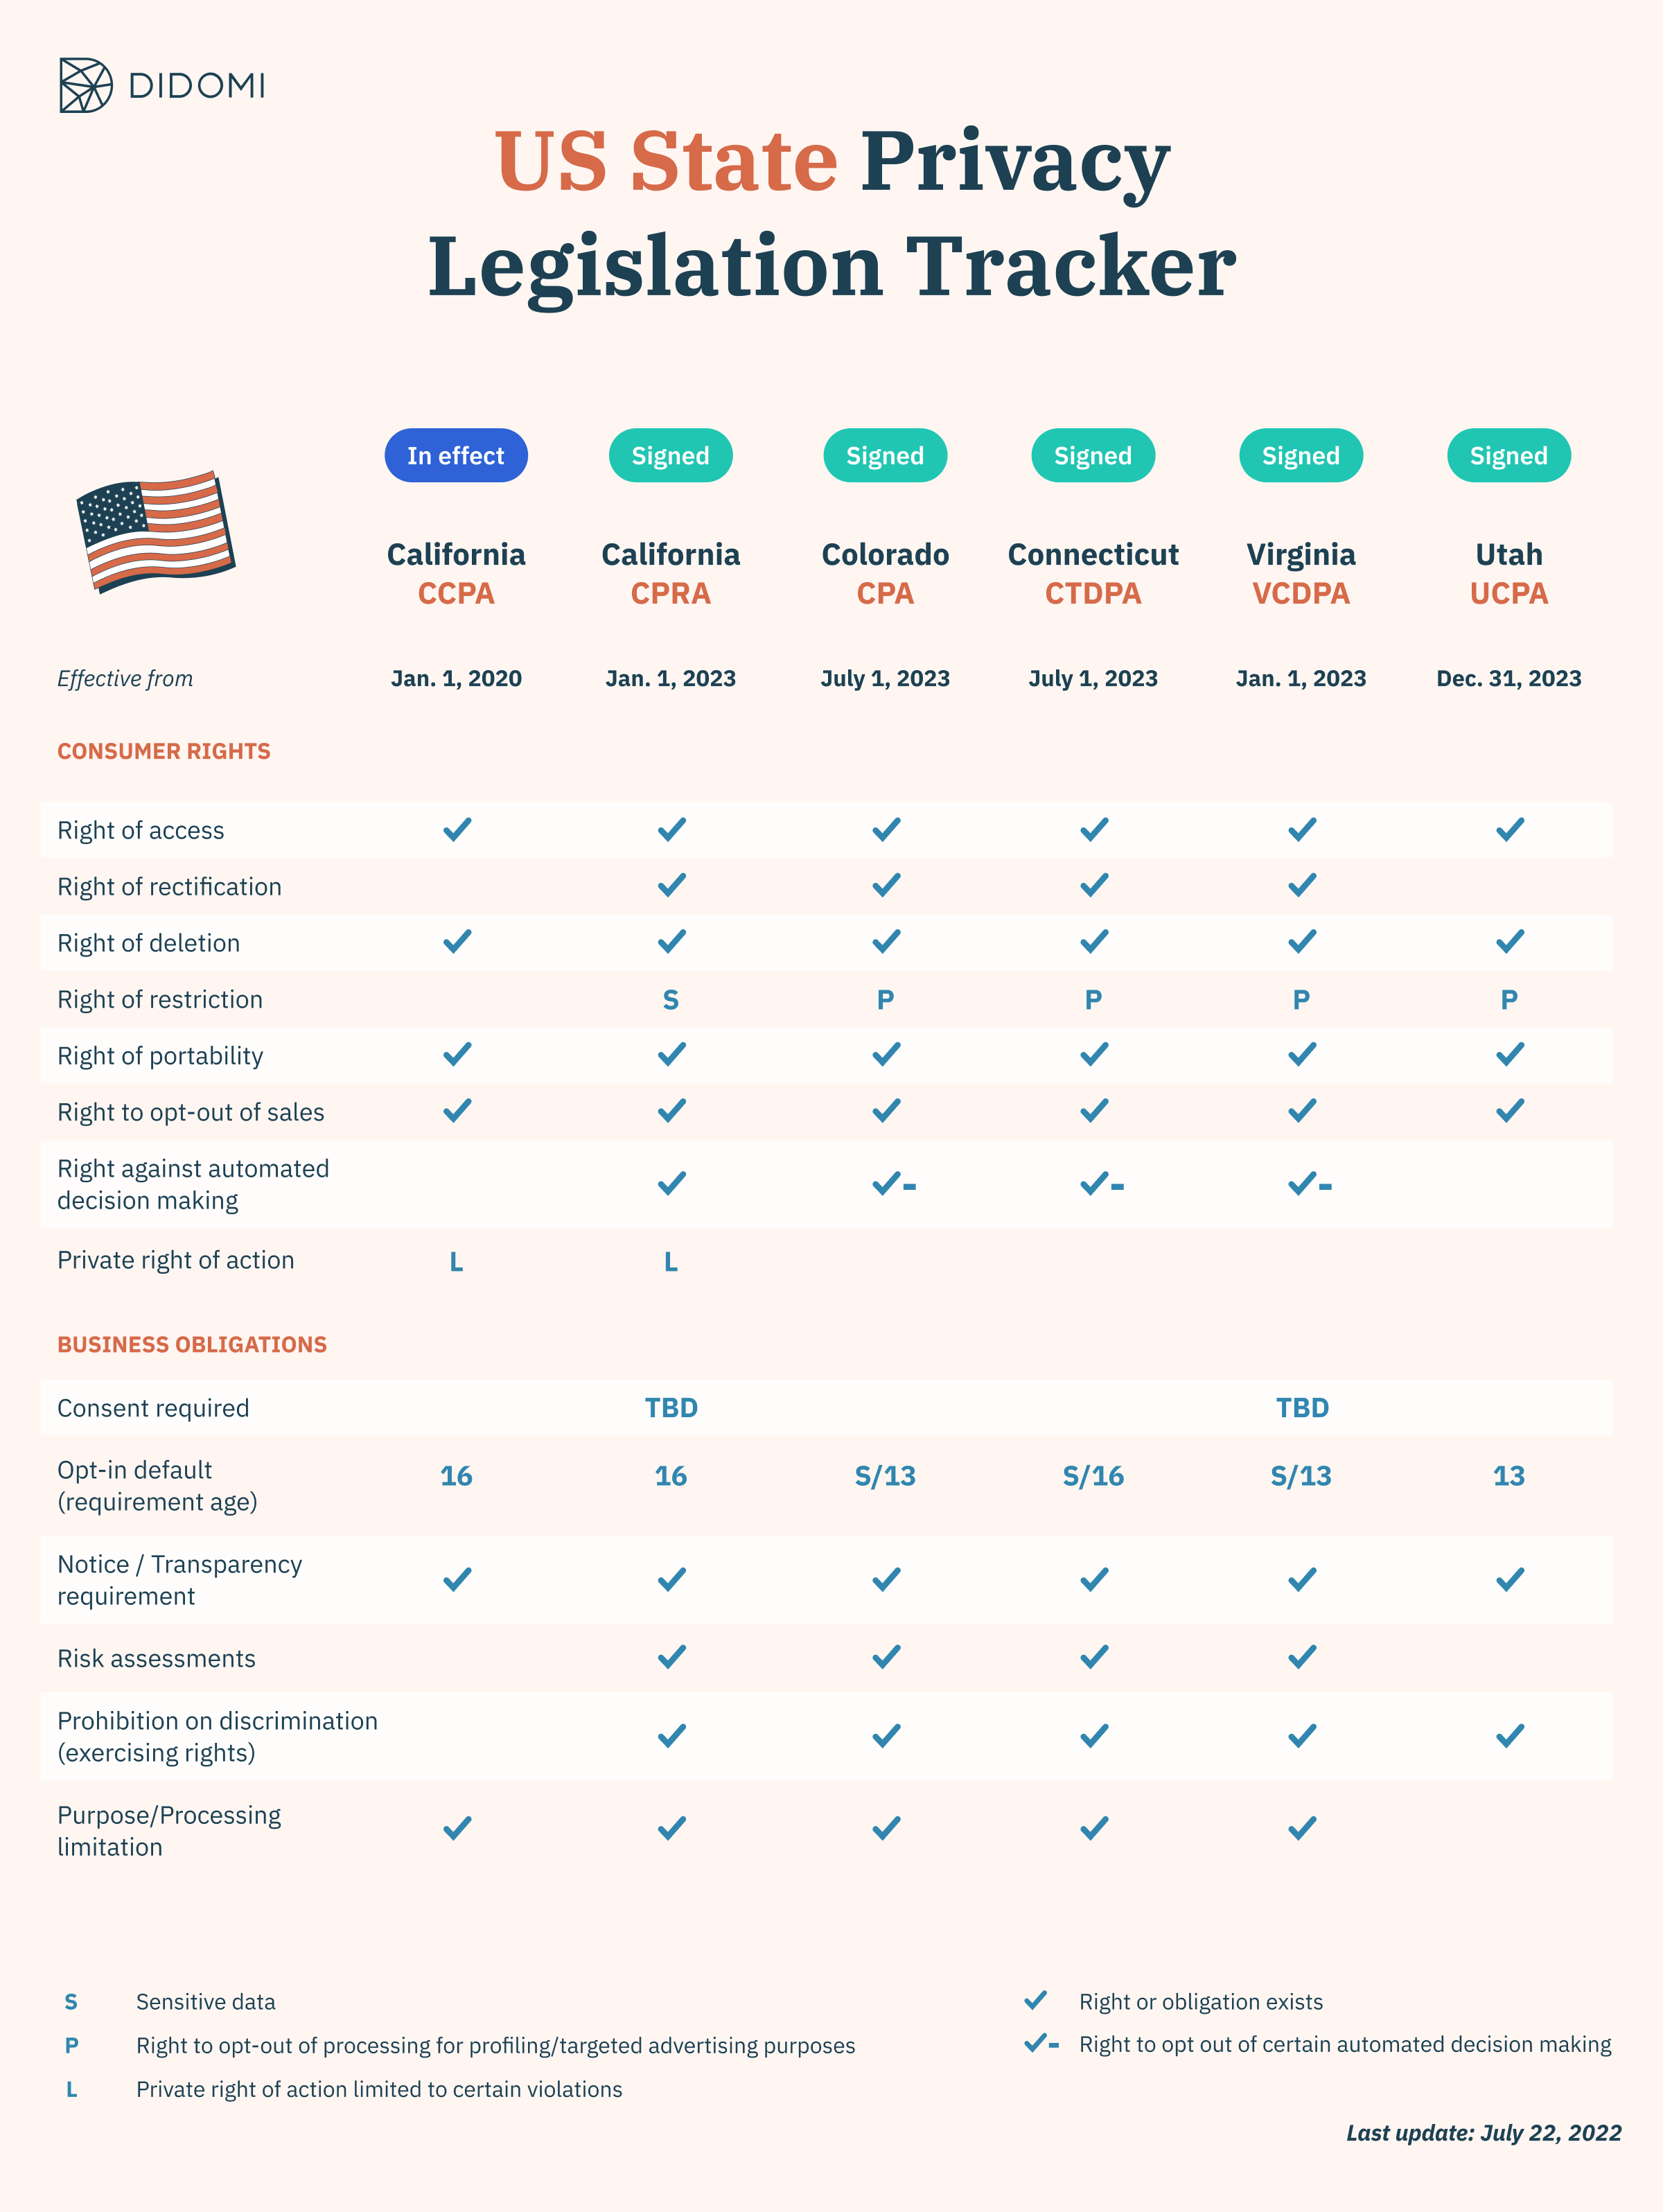 Consumer data privacy laws in the United States